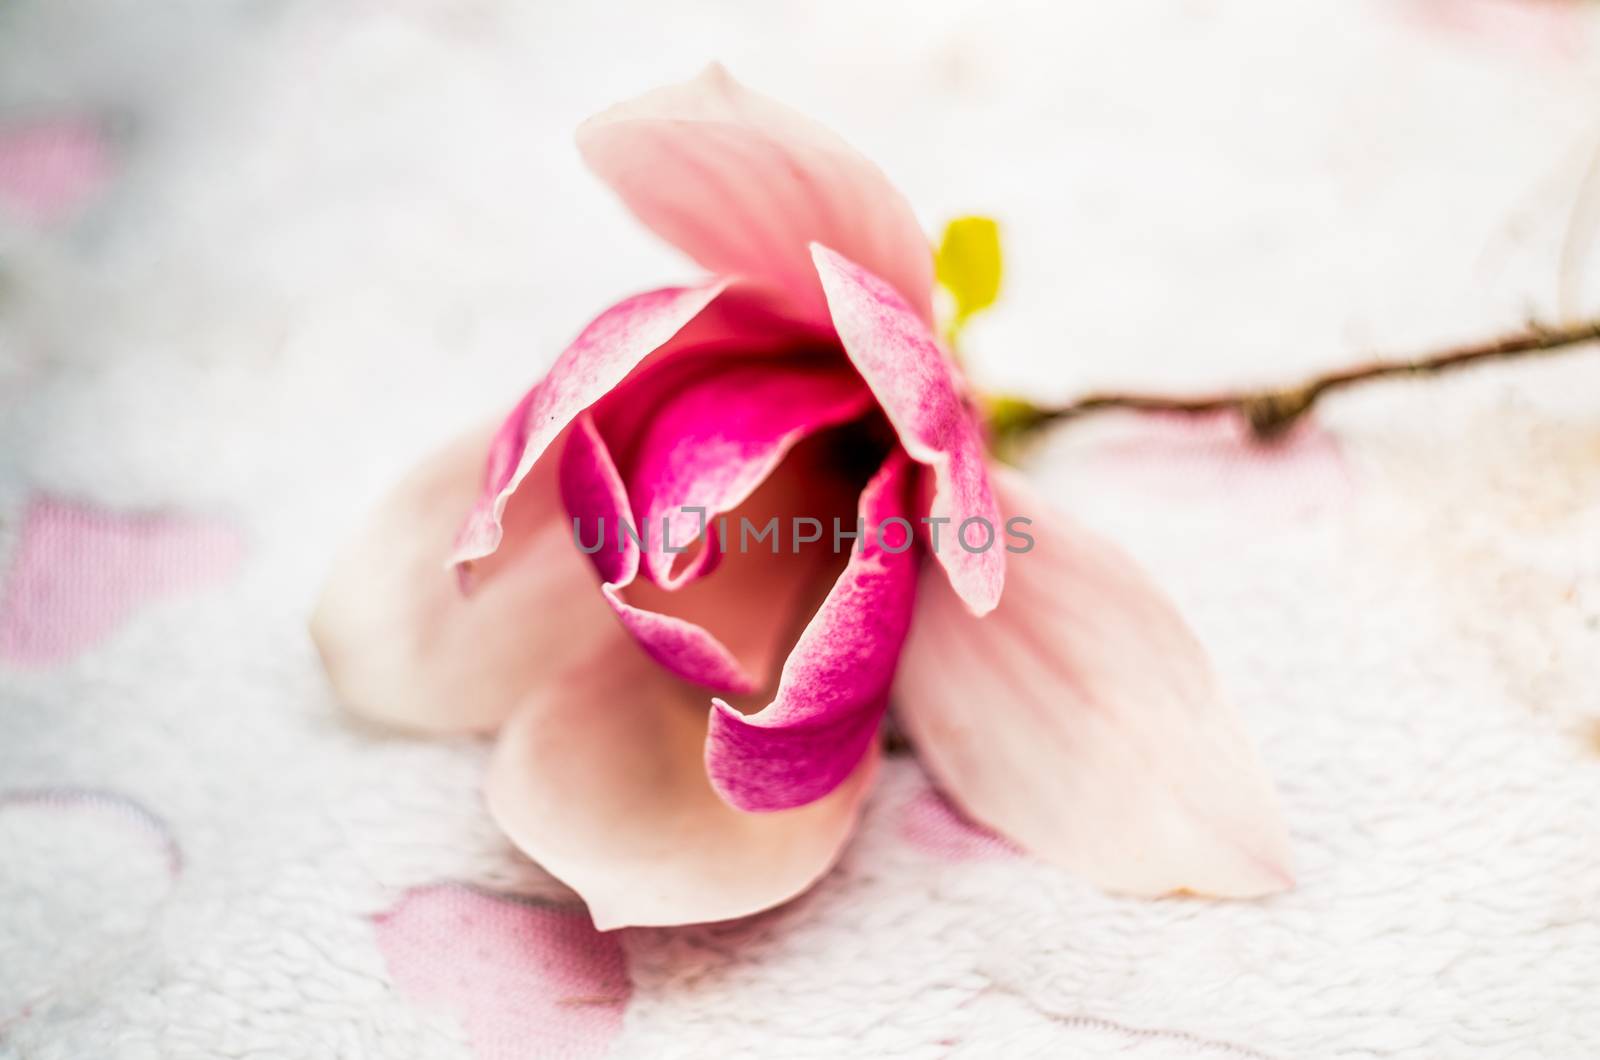 pink rose on the pink soft rug on nature background